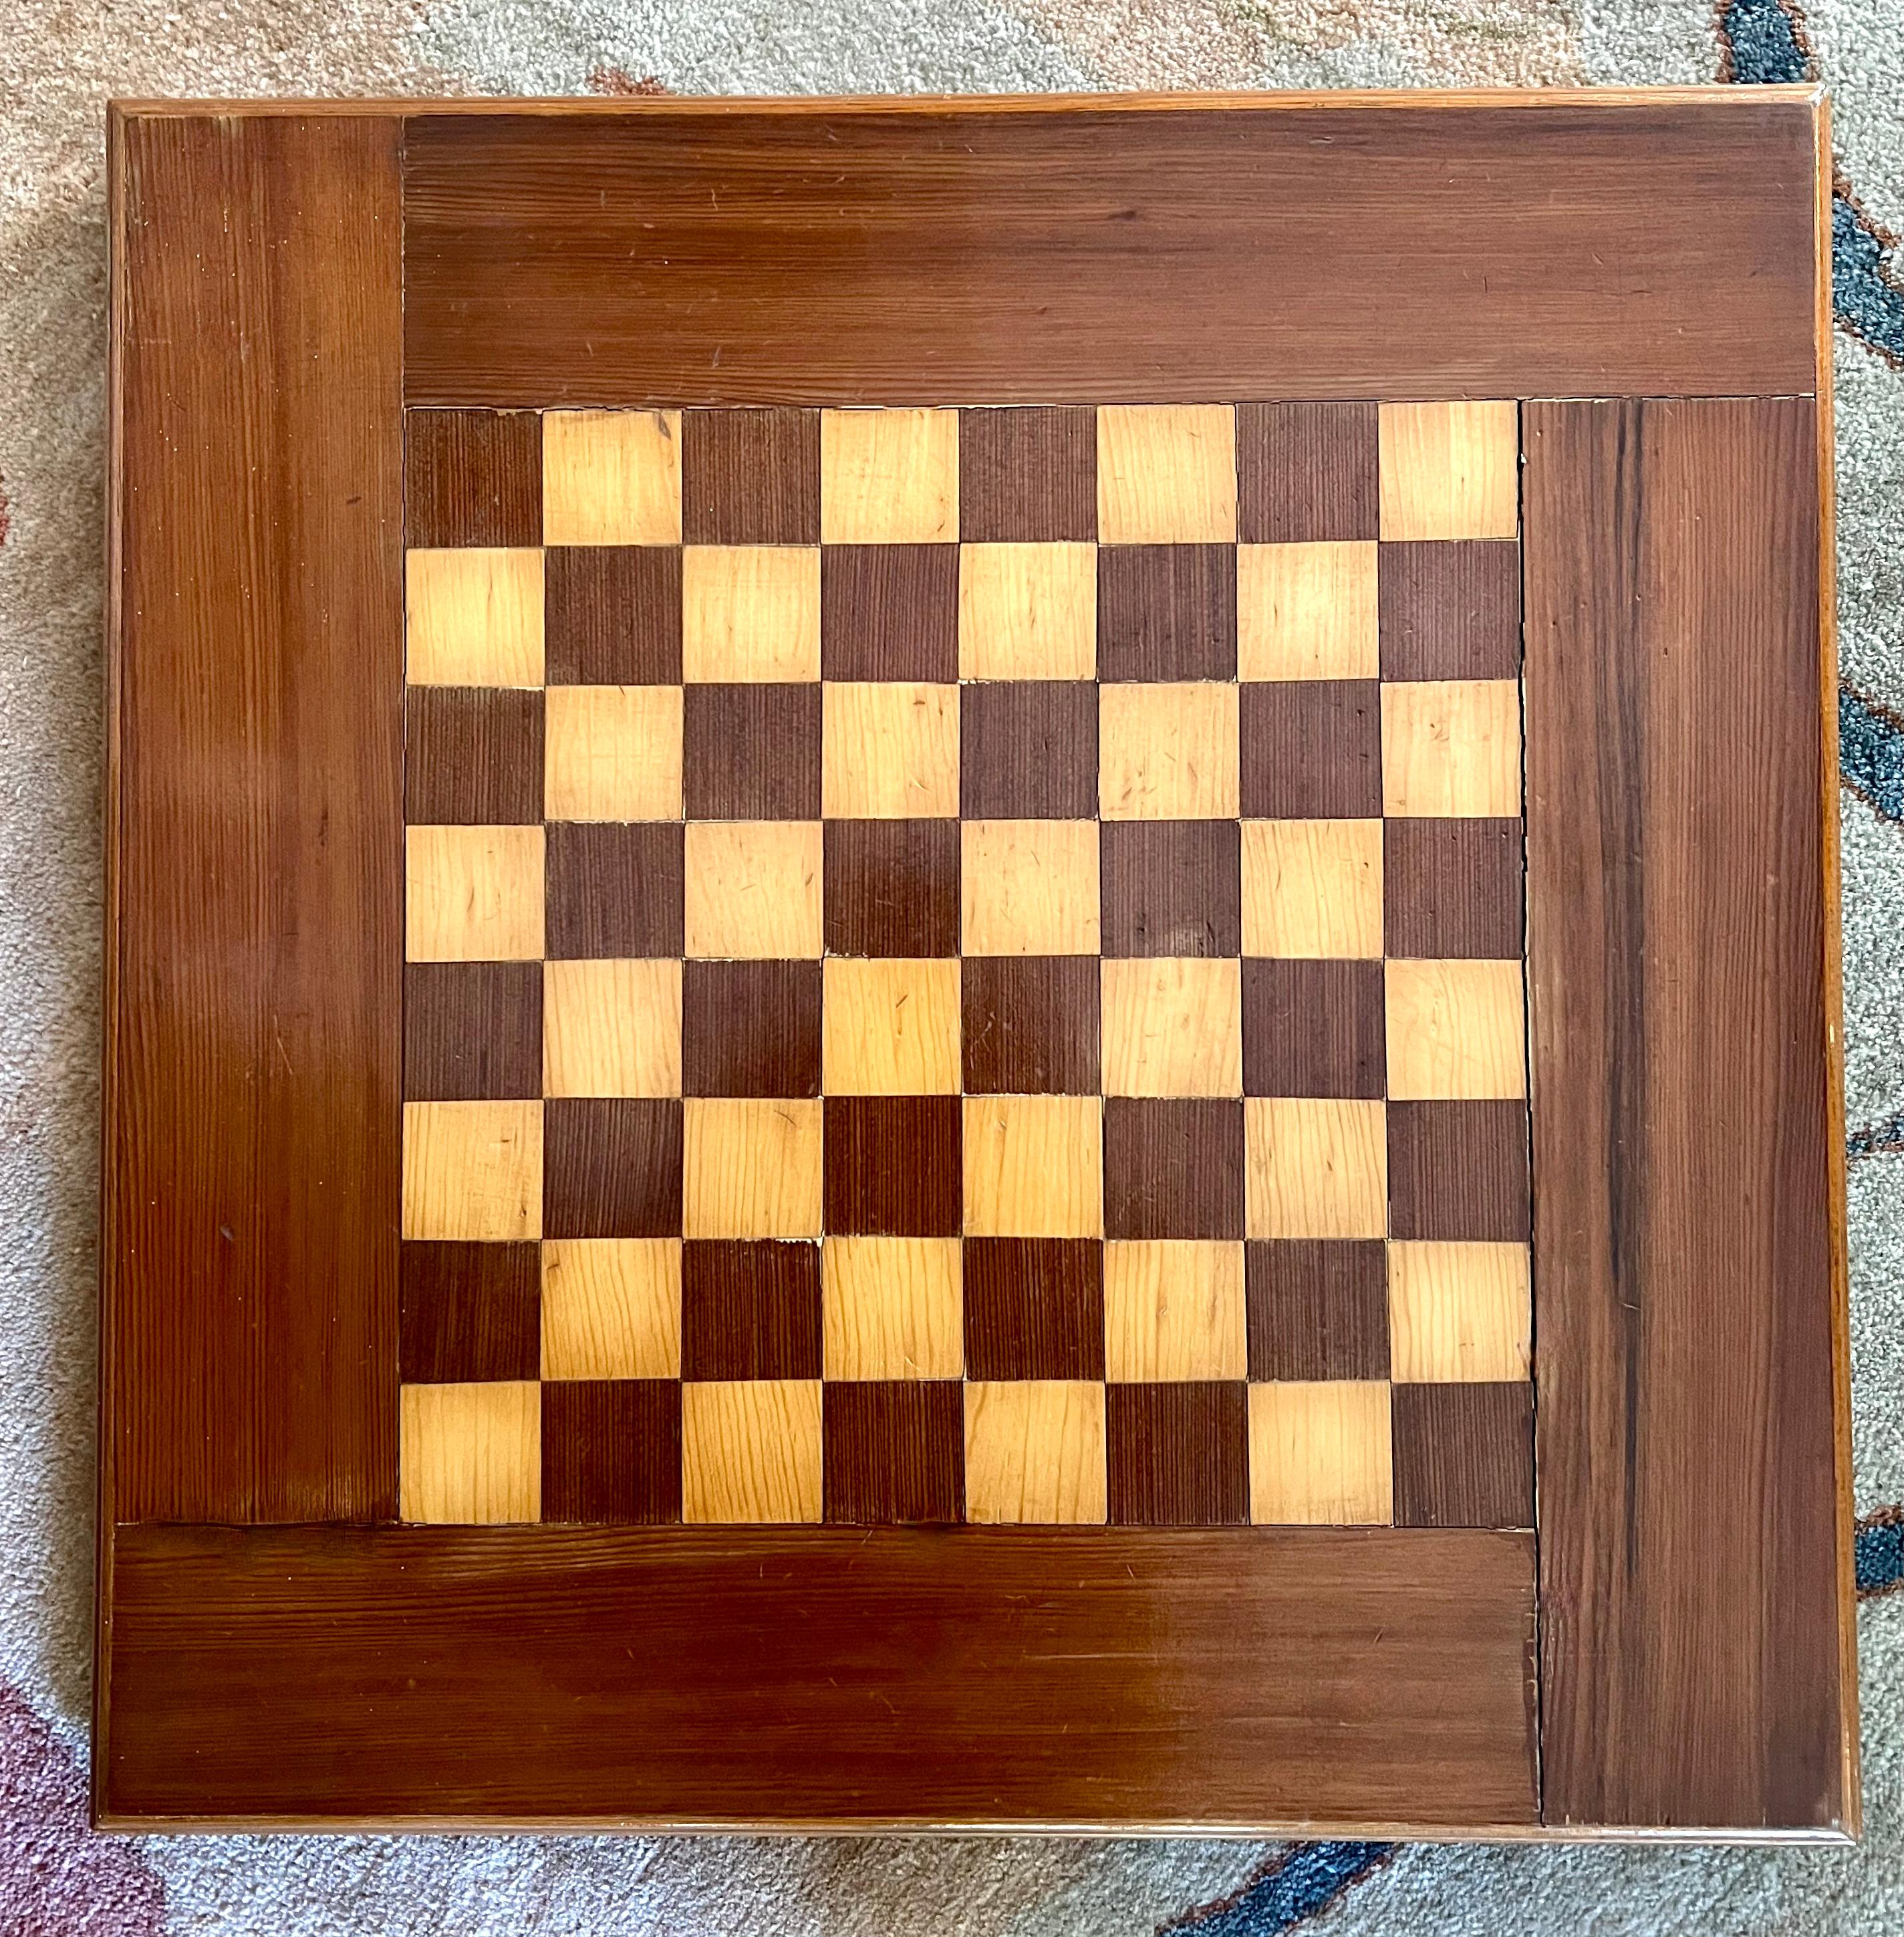 A wonderful and very large chess or checker board made of inlay wood with a 3.75